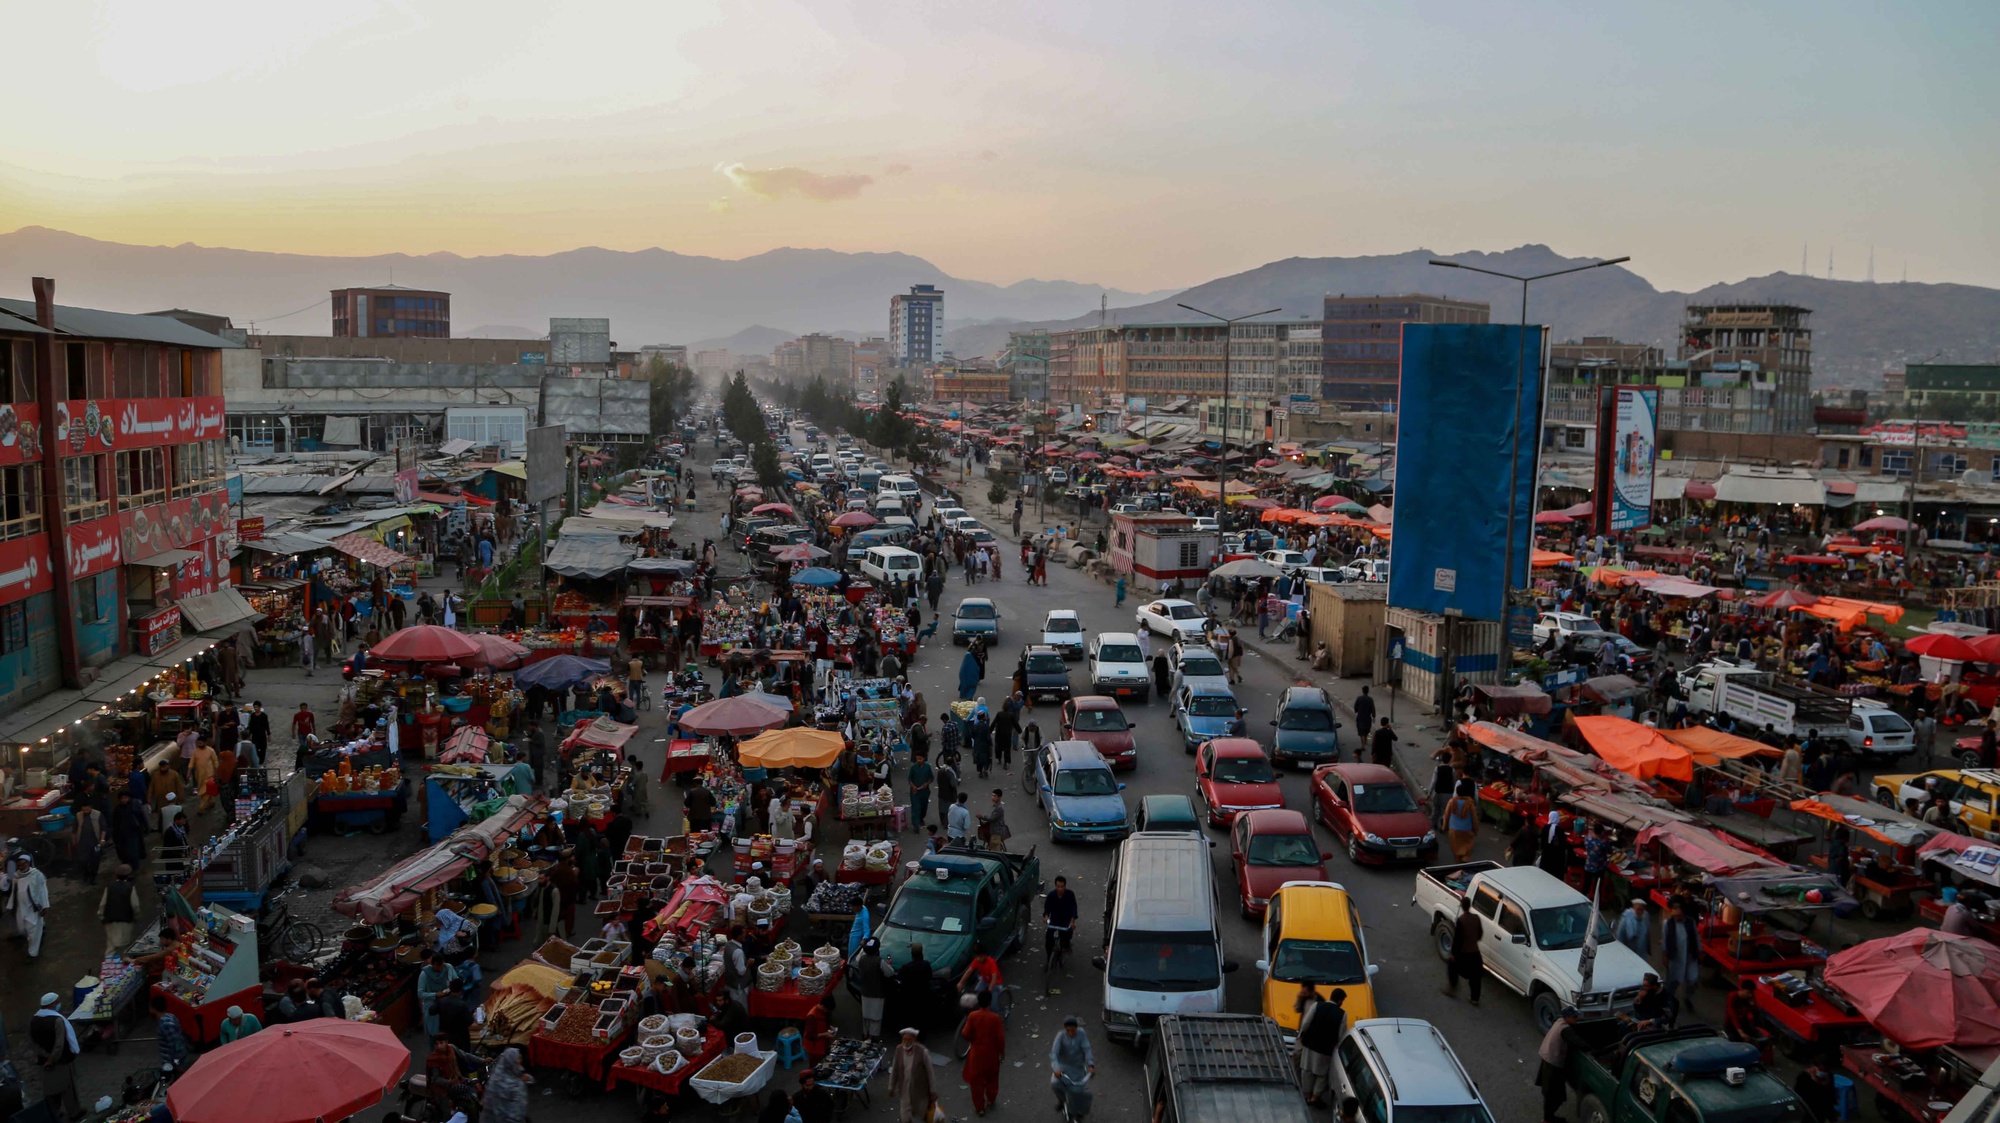 epa09492682 A view of a traffic jam in Kabul, Afghanistan, 28 September 2021. Lack of international recognition remains a pressing problem for the Taliban, who are not only geopolitically isolated but are also facing a major cash crunch after international financing institutions froze most of the funds Afghanistan has long relied upon for economic stability.  EPA/STRINGER